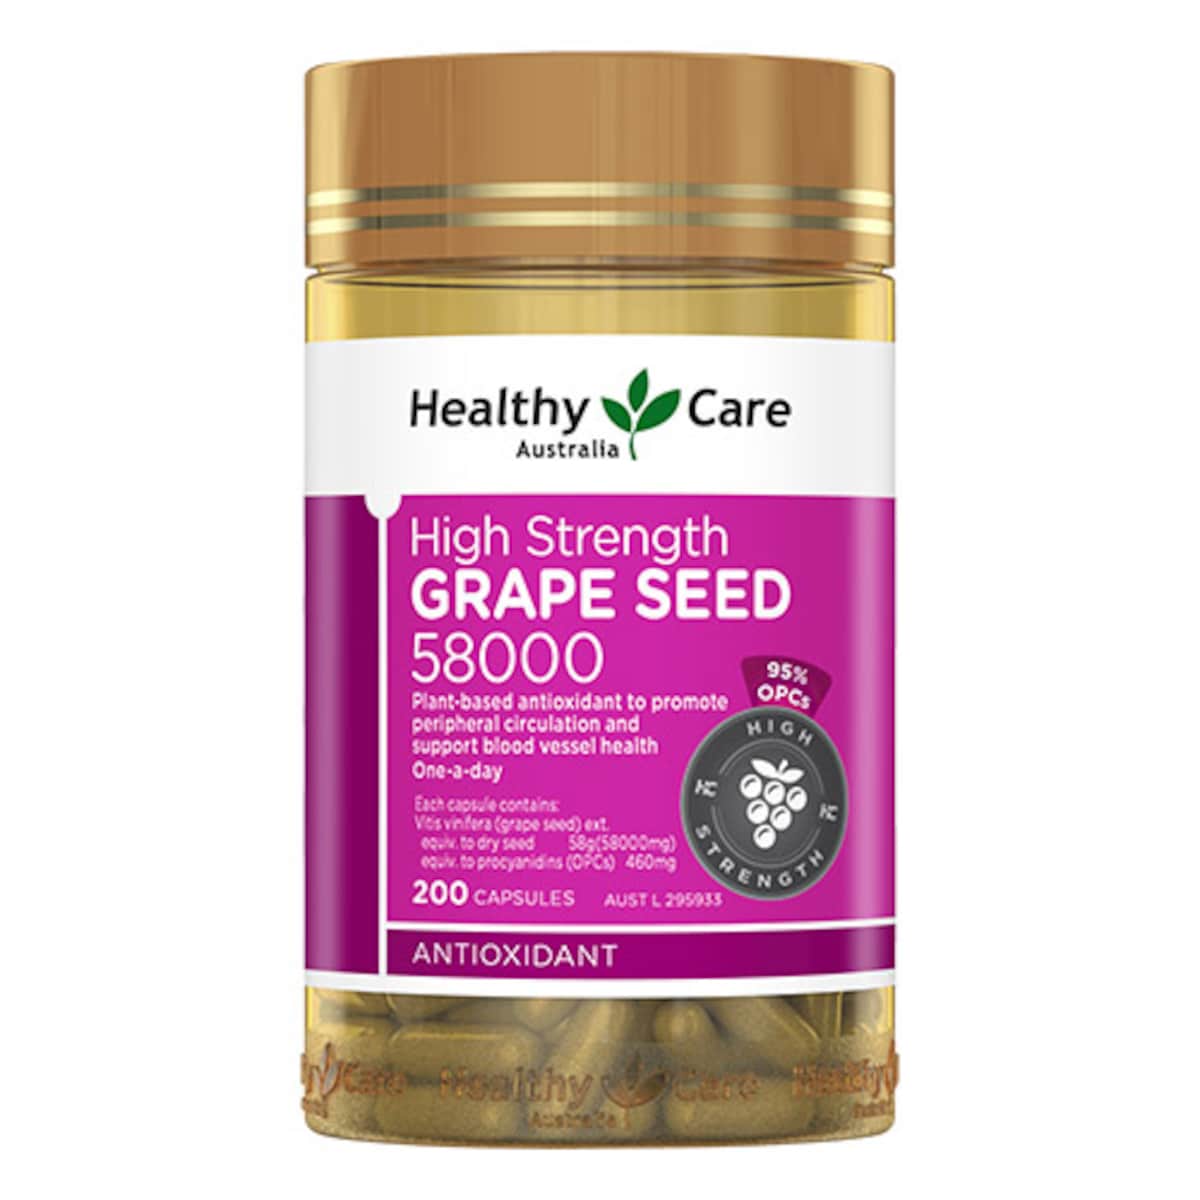 Healthy Care Grape Seed Extract 58000 200 Capsules Australia